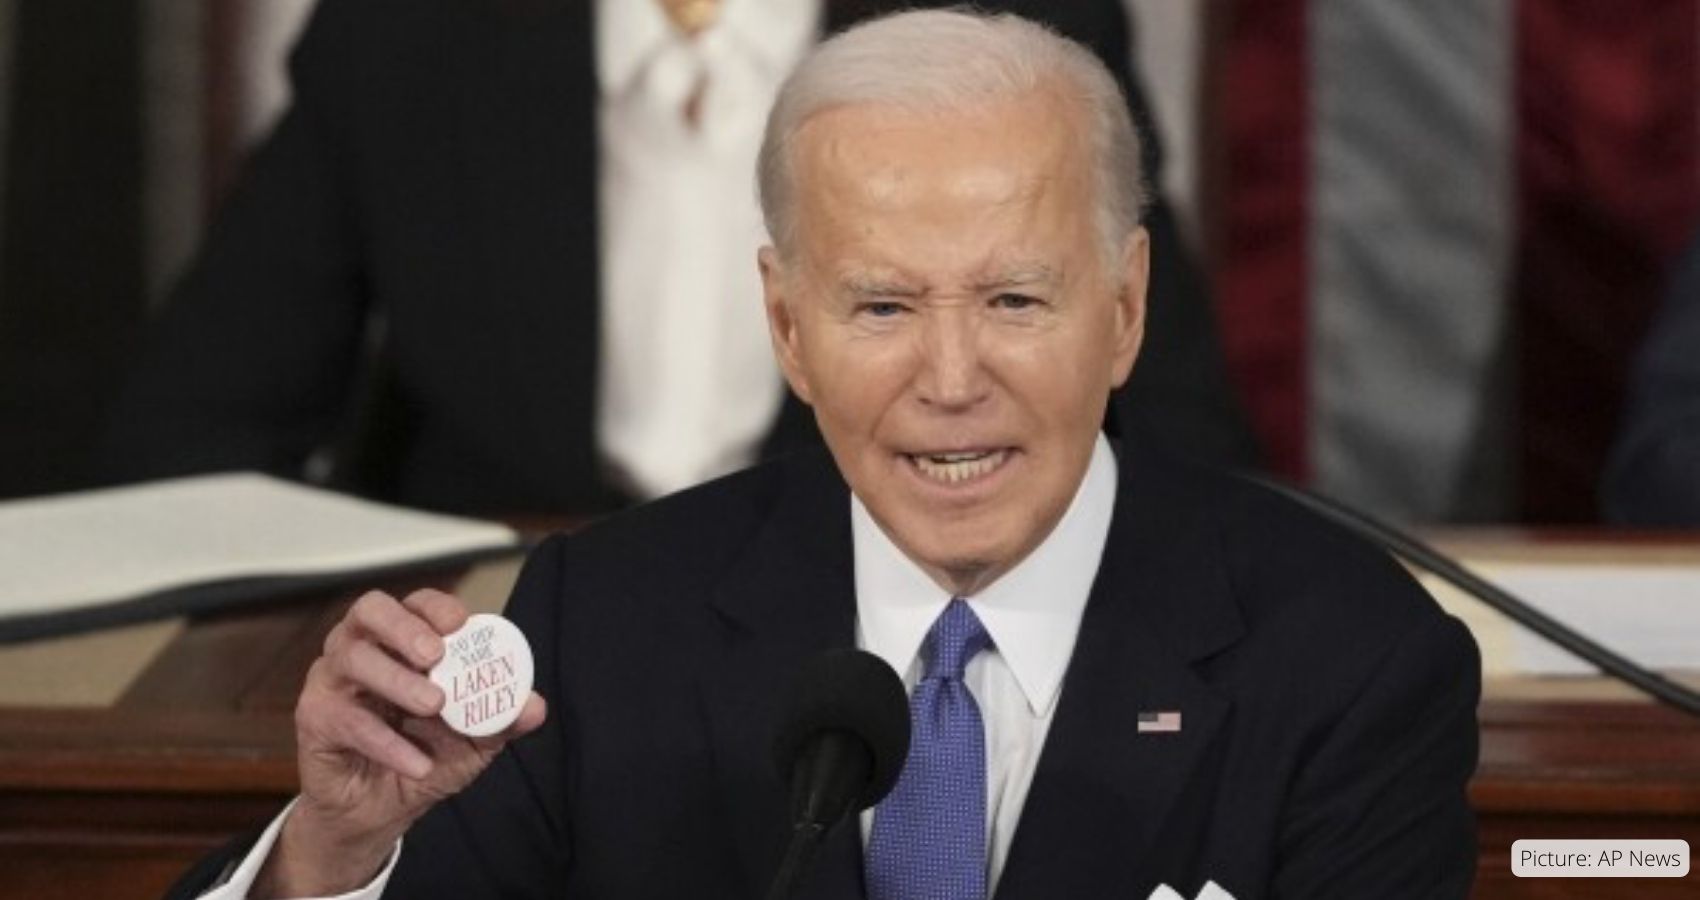 President Biden Draws Contrasts, Asserts Vision in State of the Union Address